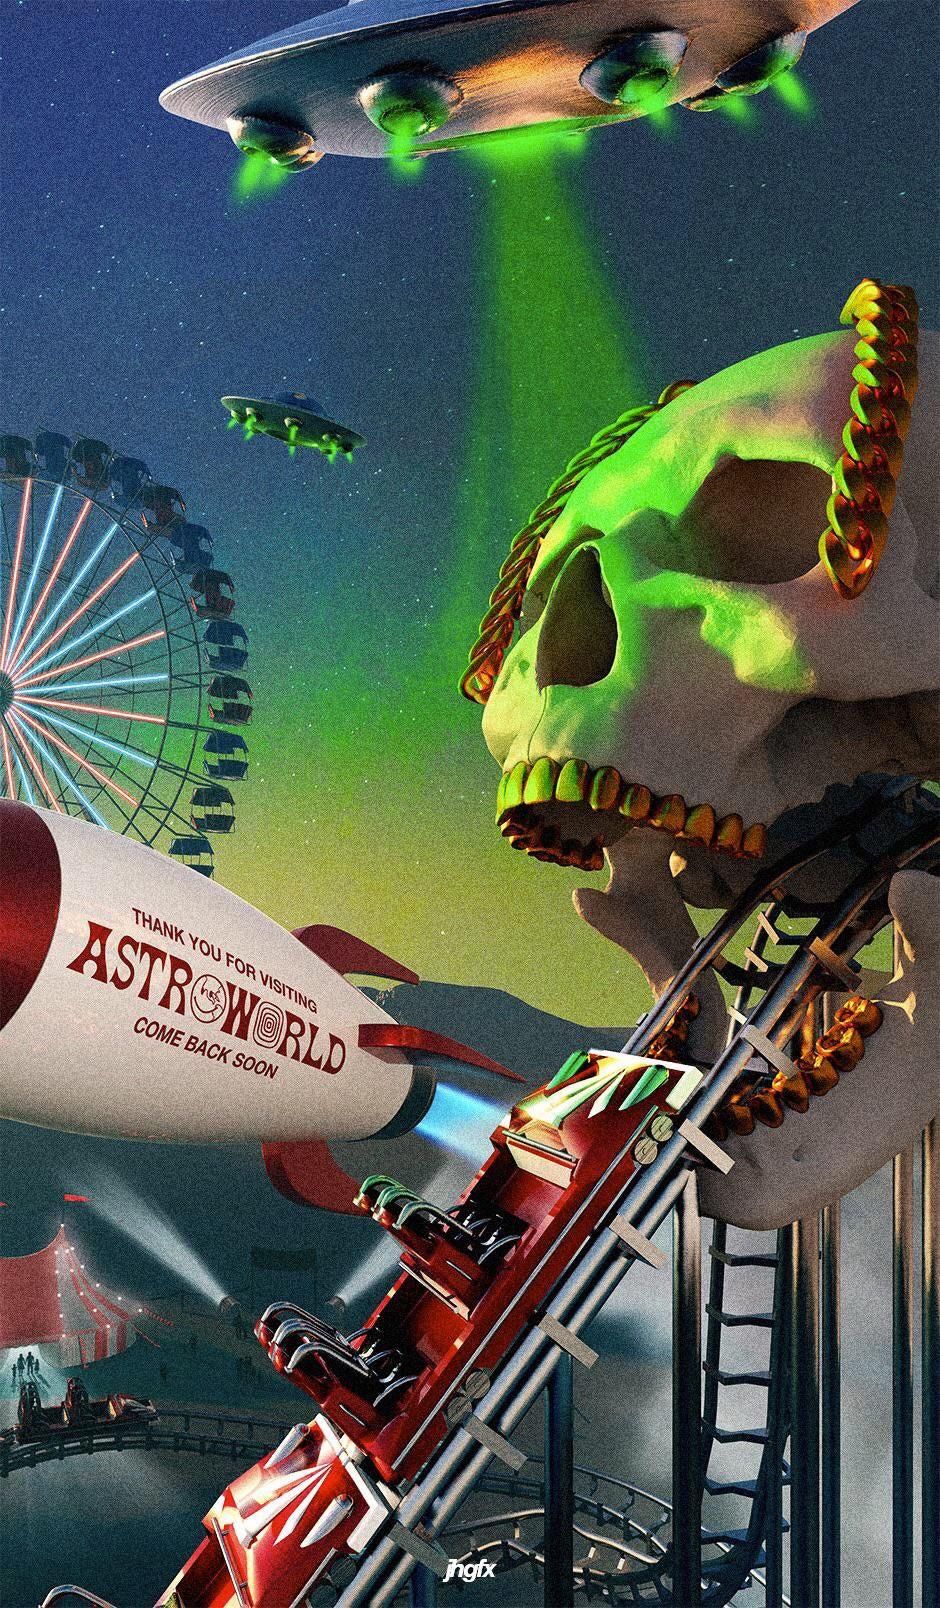 Astroworld Wallpaper - KoLPaPer - Awesome Free HD Wallpapers